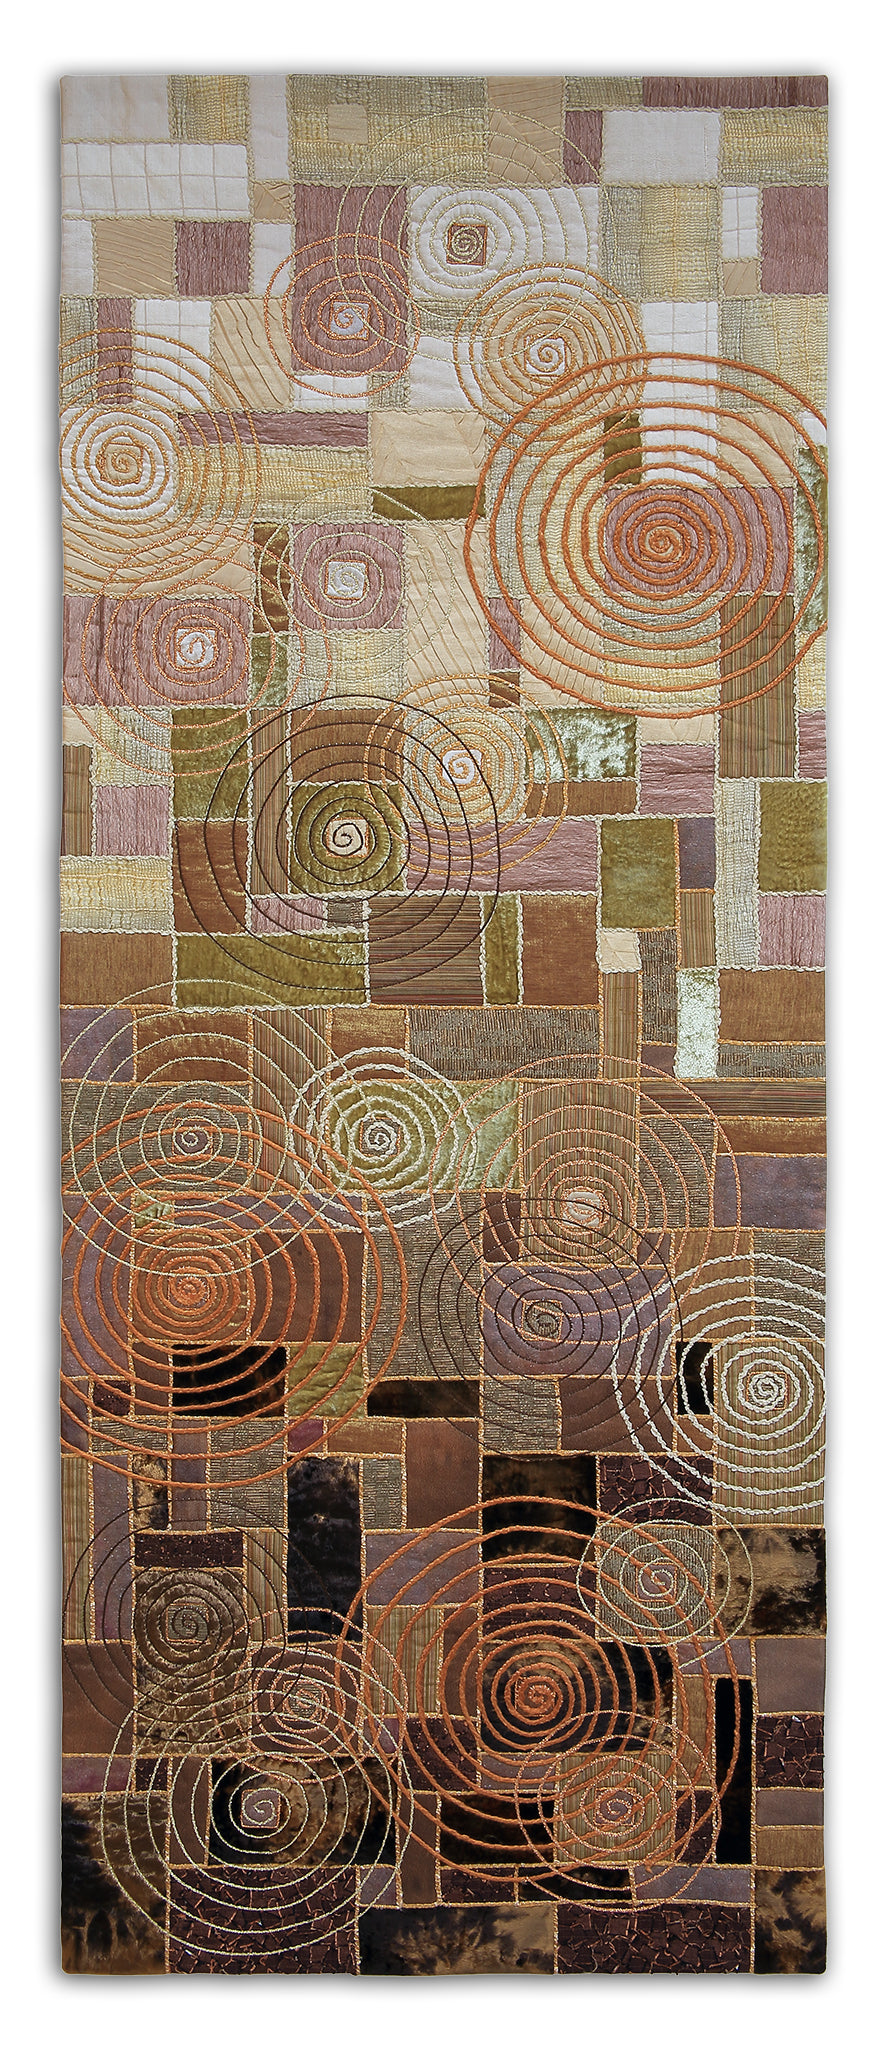 ART QUILT TITLED: Spiraling CREATED: by Karen Hampton SIZE: 9 ¼” x 50”  The original design has no machine piecing. Each piece of decorator fabric was fused to a muslin backing and yarns were couched over the edges. The spiraling rings were added with additional yarn couching